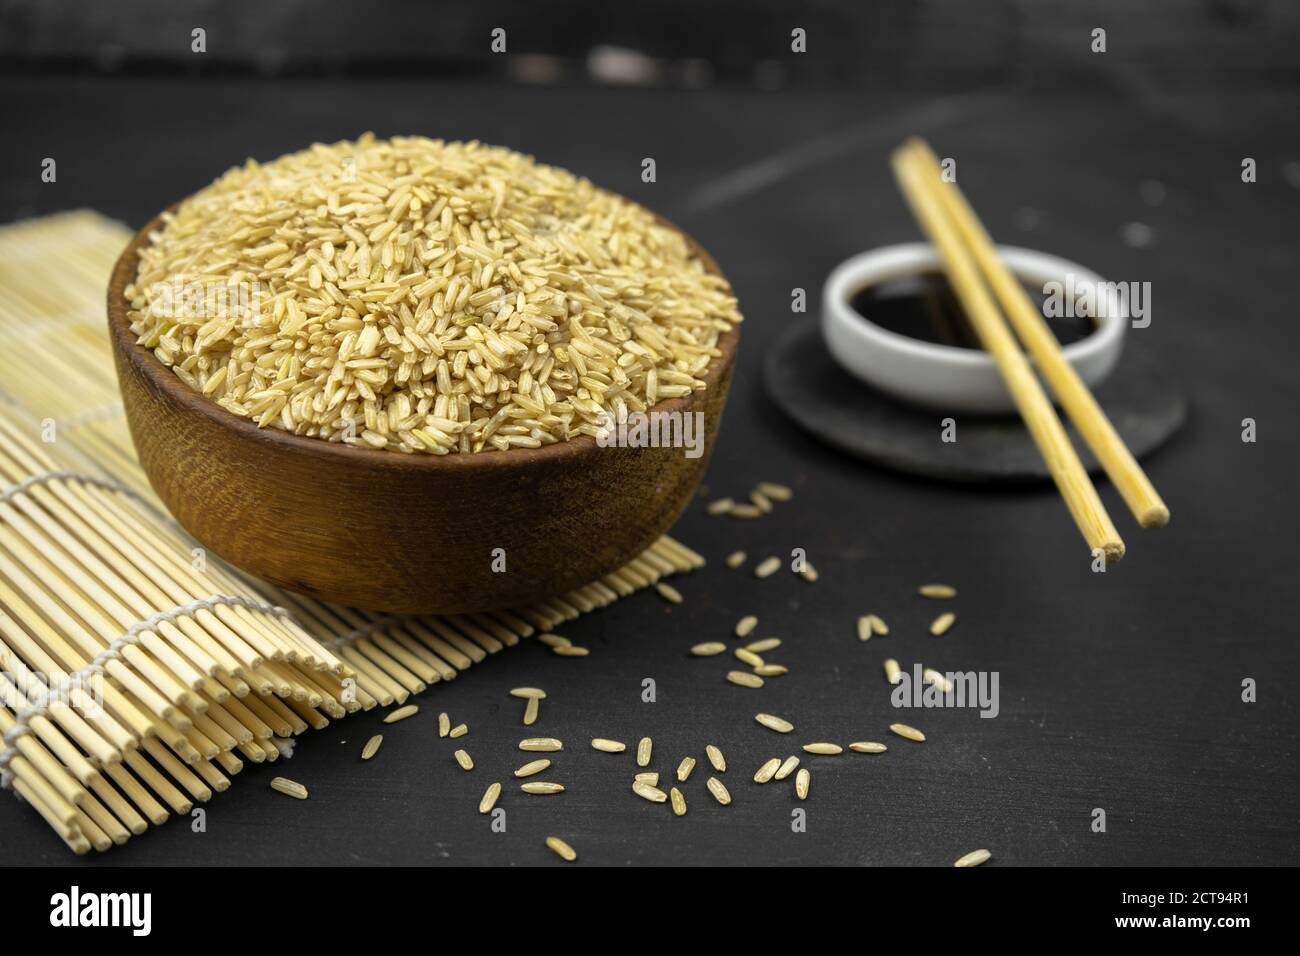 brown rice in a wooden bowl on bamboo mat, asian kitchen background on black Stock Photo